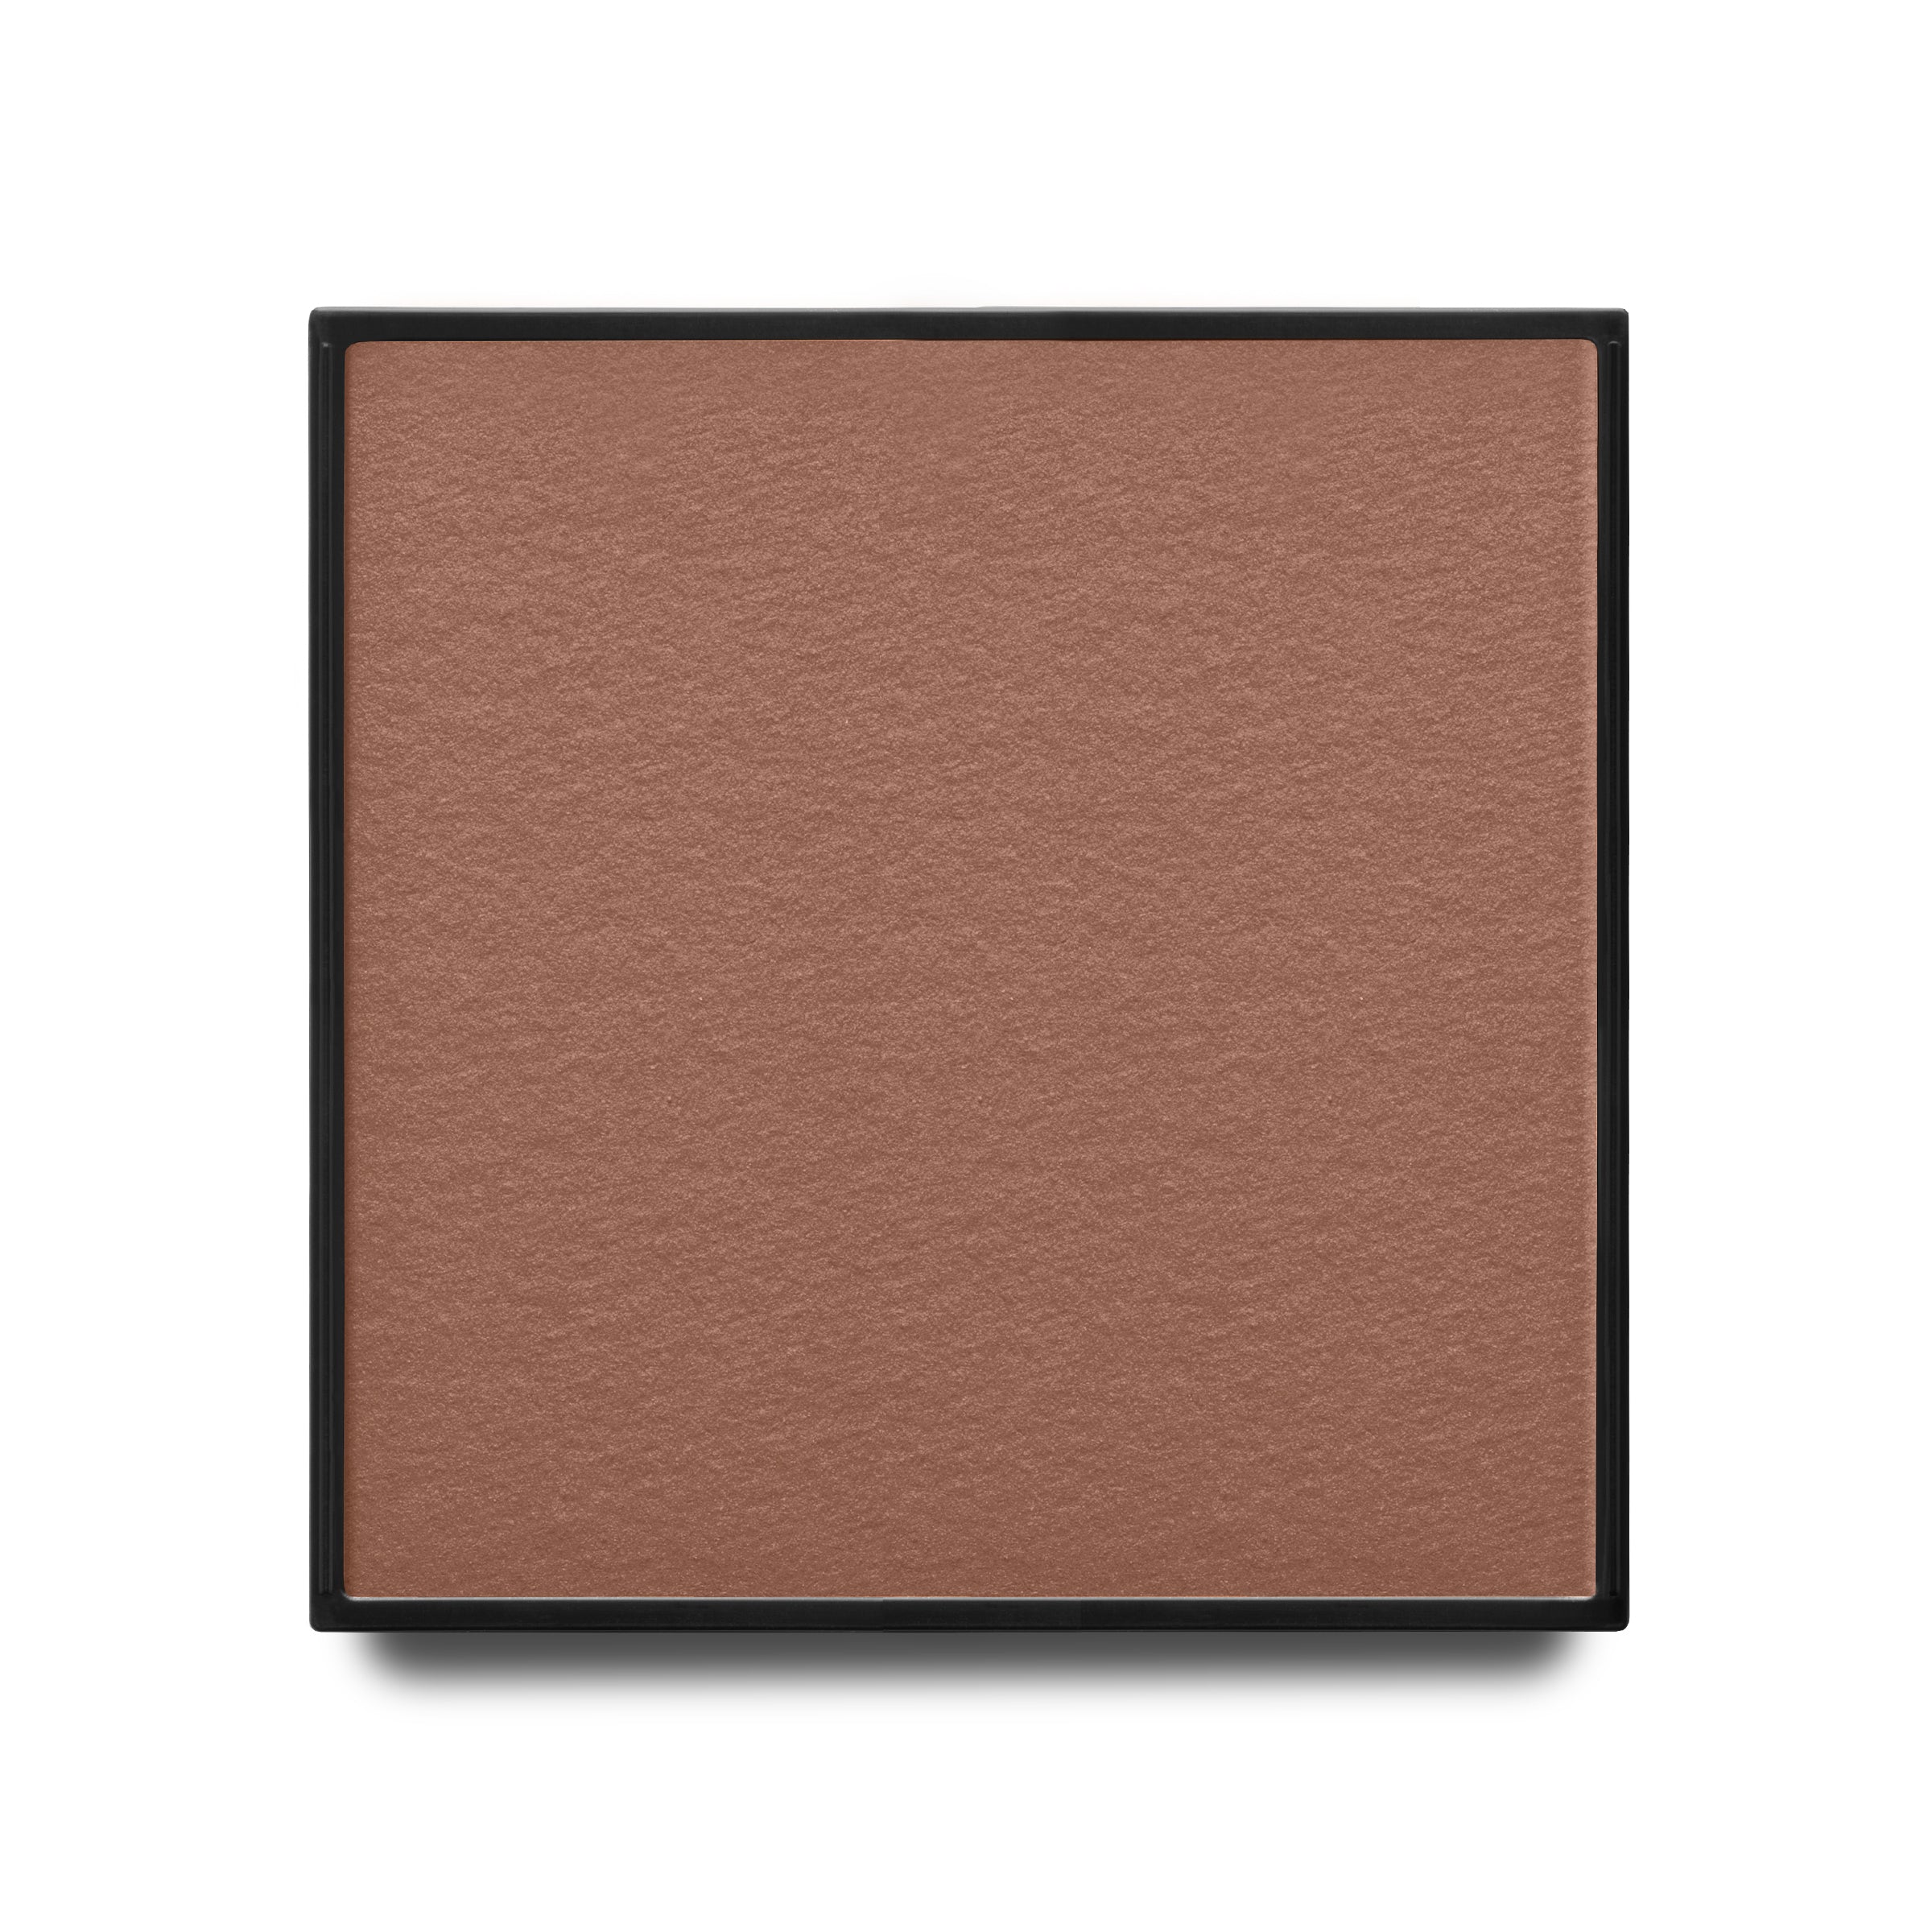 SOLEIL CLAIR - WARM UNDERTONE - bronzer refill for medium to deep complexions and warm undertones in a satin finish